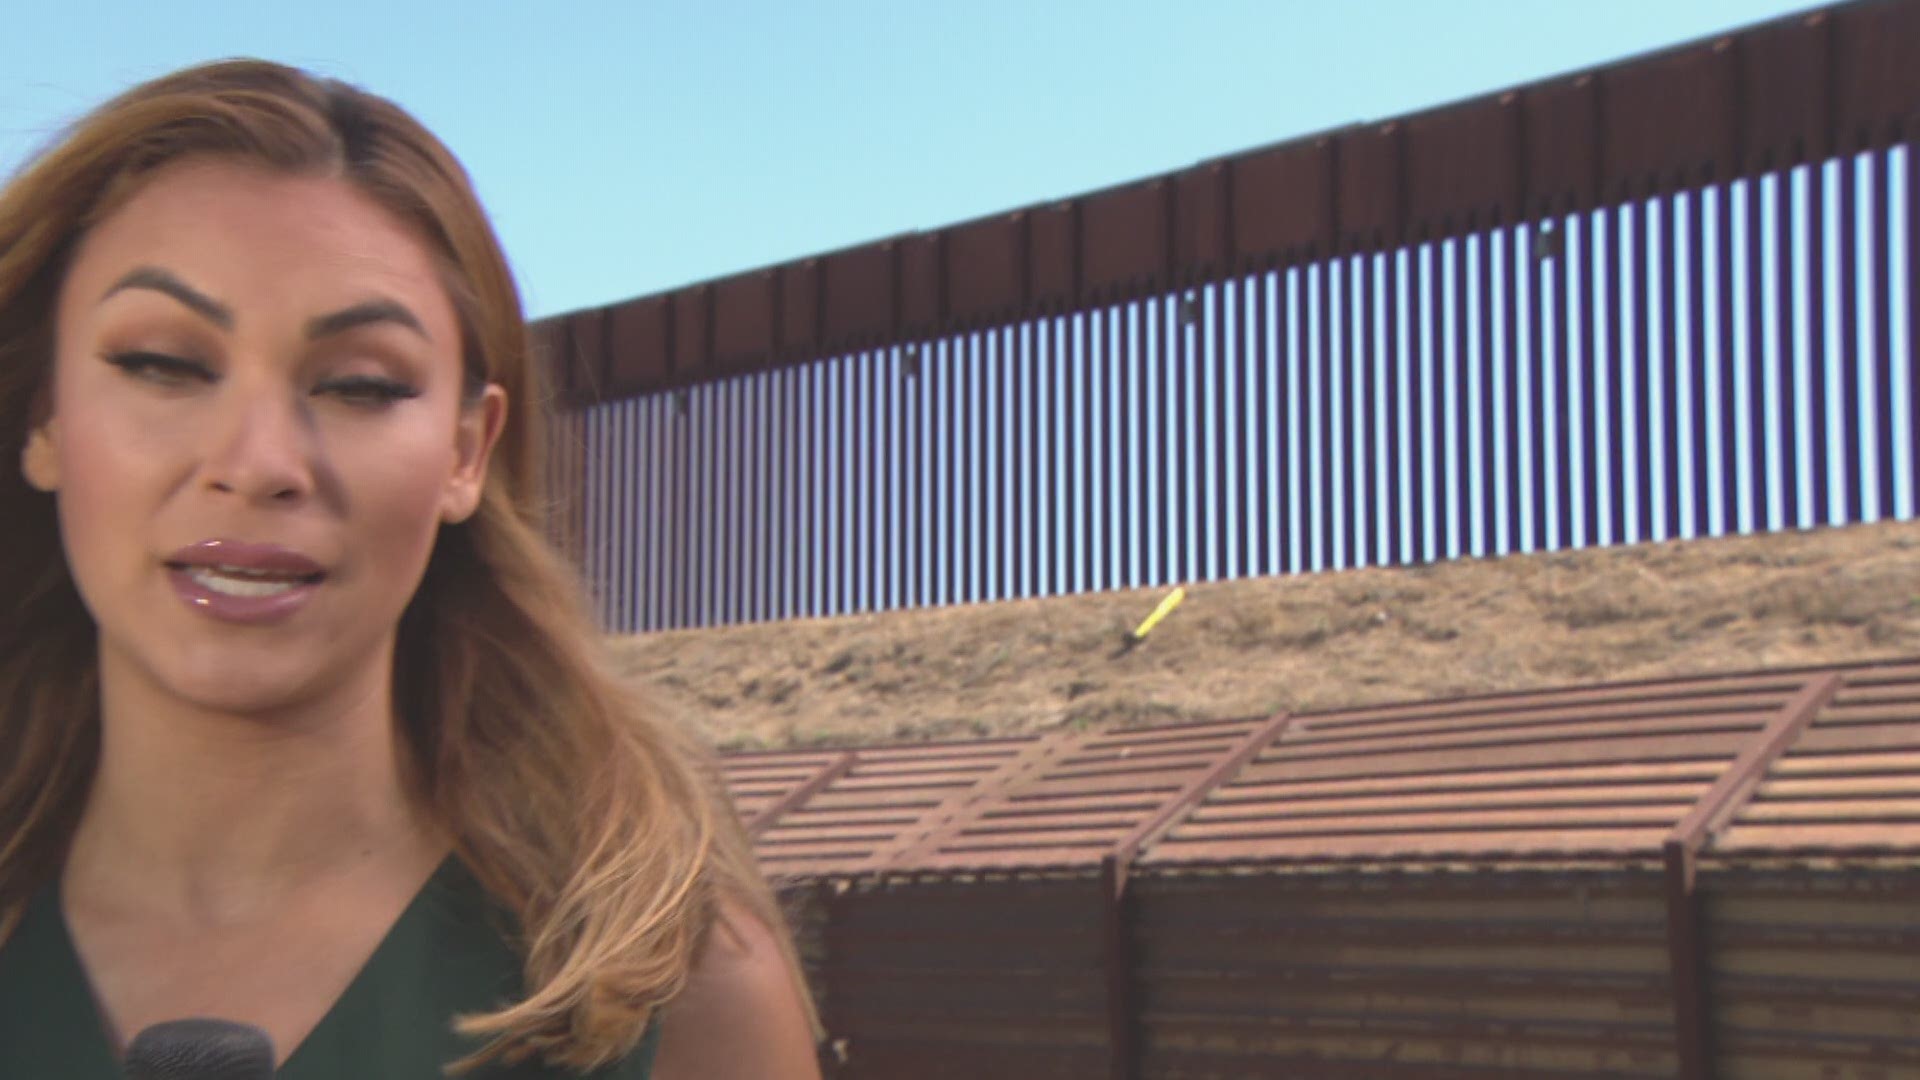 In this Verify, we explore the U.S. Mexico Border wall and its materials.